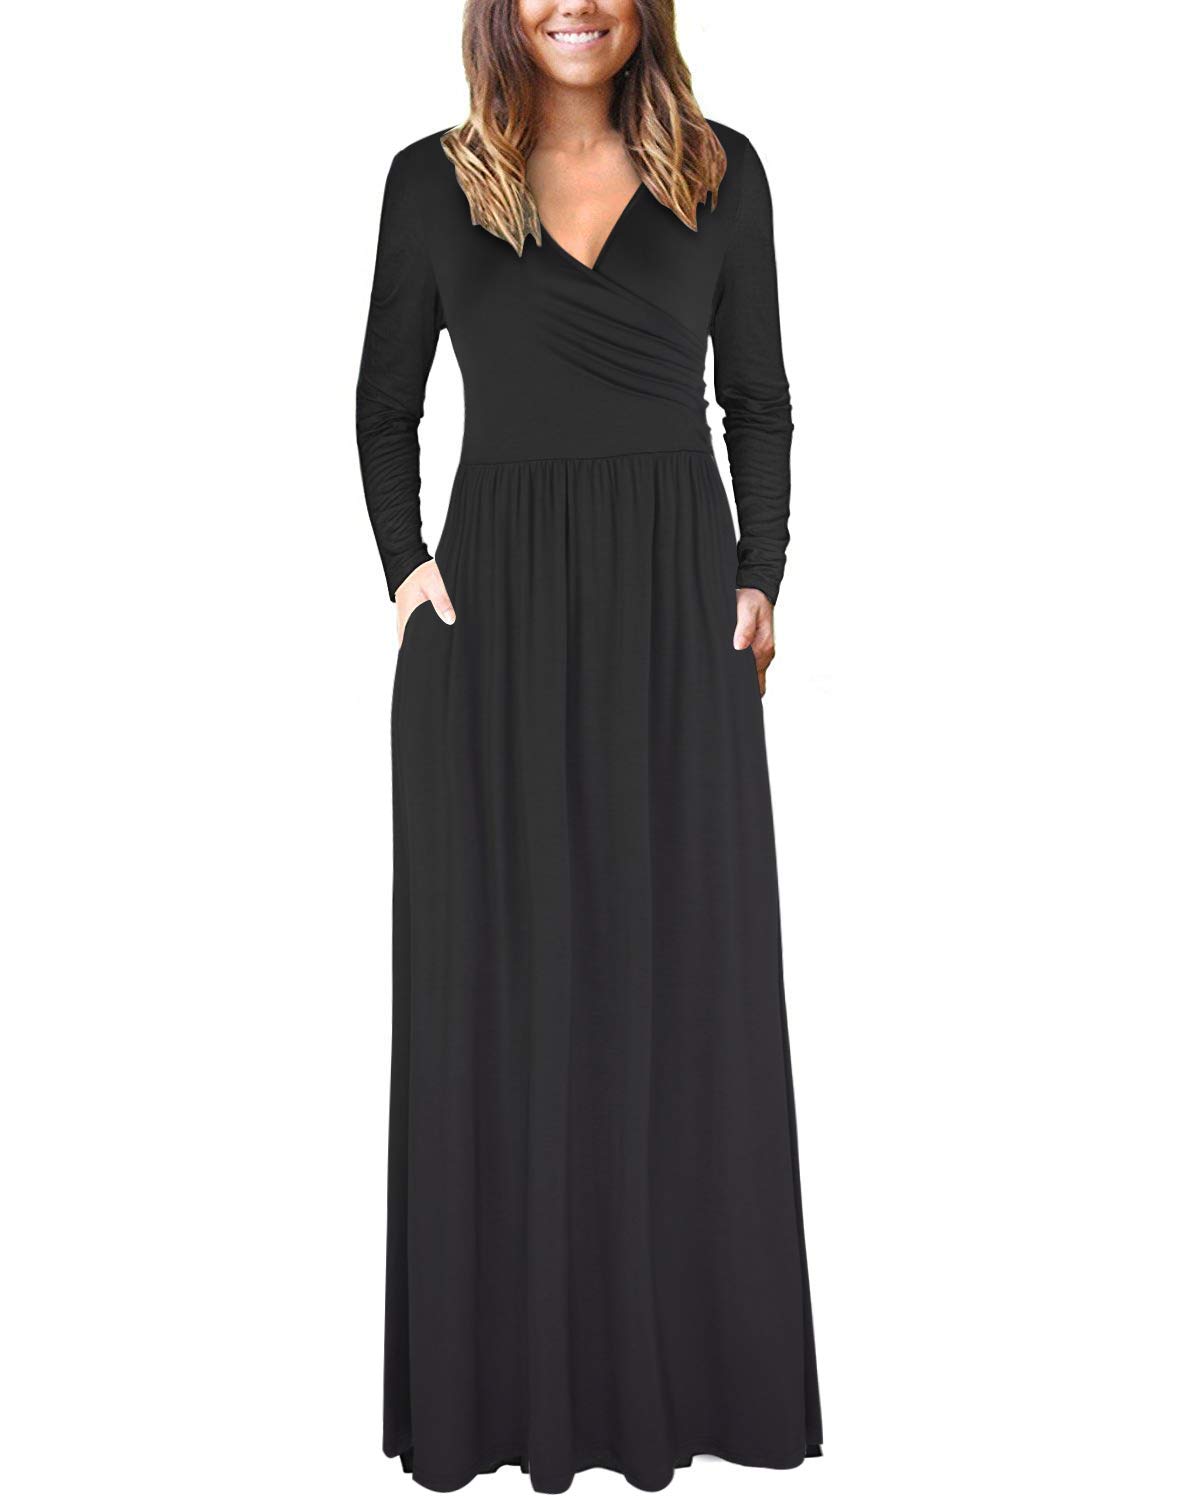 Book Cover STYLEWORD Women's Long Sleeve Plain Maxi Dresses Pleated Casual Long Dress with Pockets